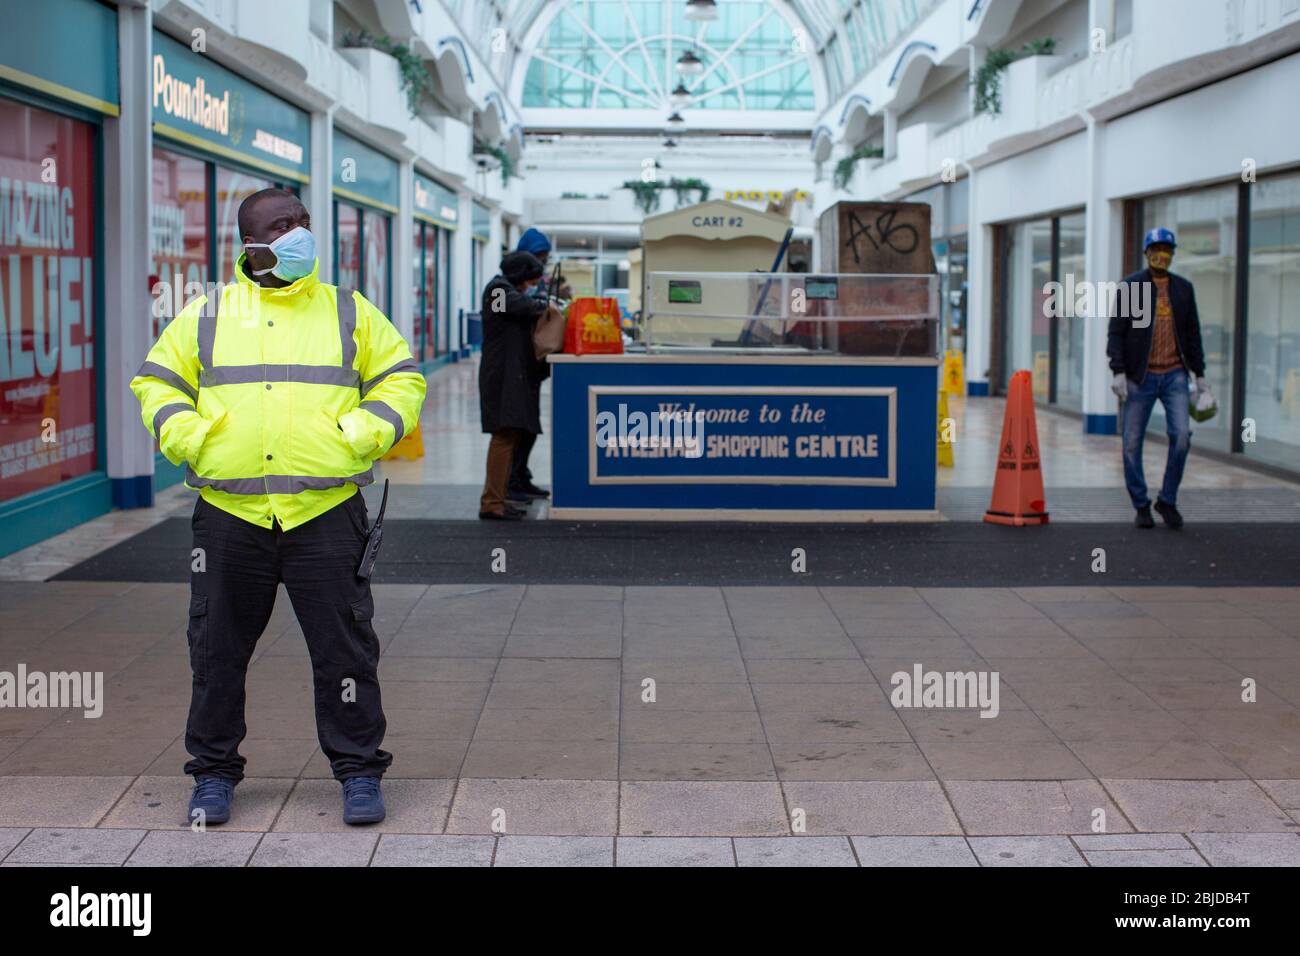 Peckham, UK. 29th April, 2020. Life in South London during the Coronavirus lockdown. A security guard wearing a protective face mask and high visibility jacket stands outside Aylesham Shopping Centre in Peckham. ( Credit: Sam Mellish/Alamy Live News ) Stock Photo